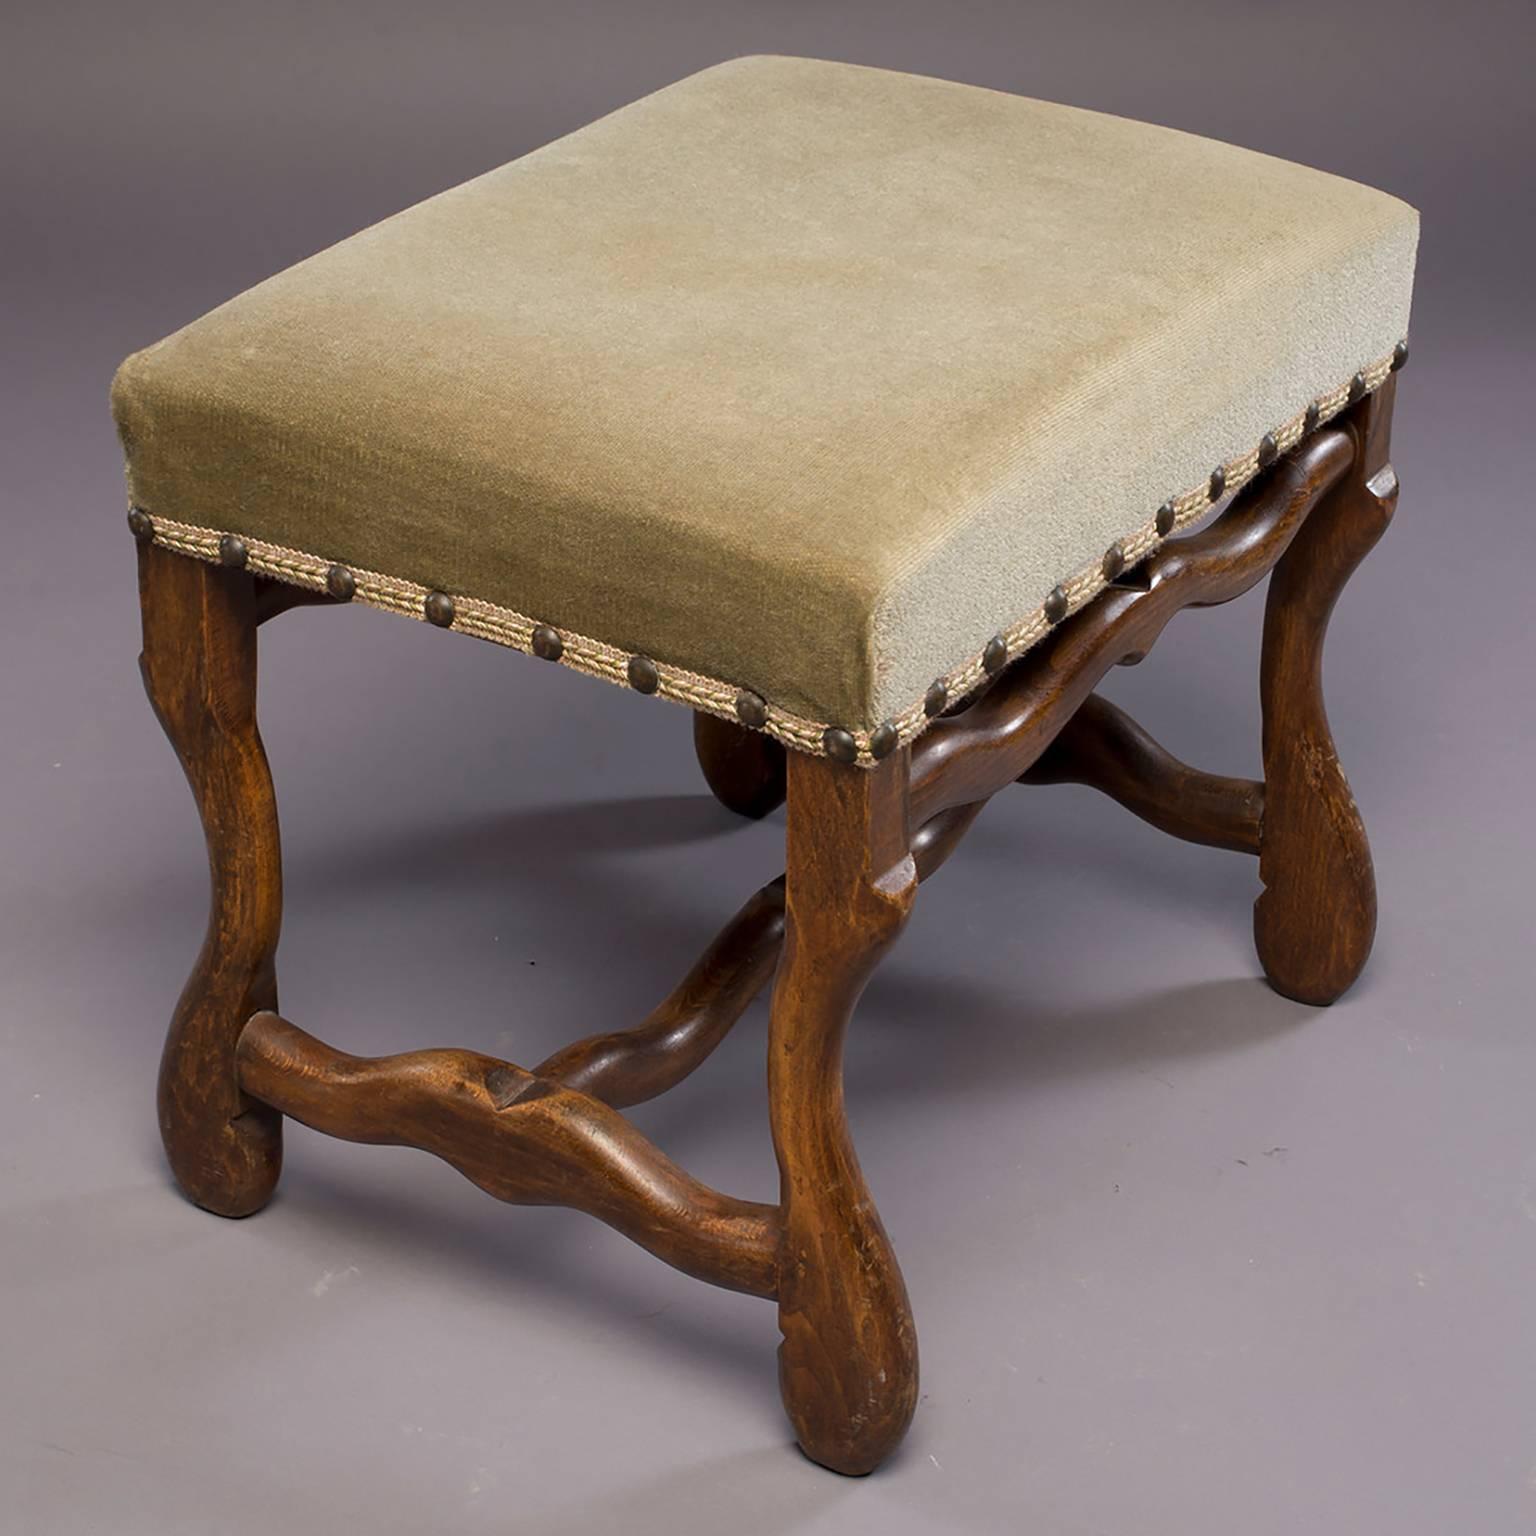 Classic Os de Mouton stool with dark wood frame, sage green velvet upholstery and brass nail head trim, circa 1920s. Curvy support stretchers at base and top front and back. Versatile size can be used as a stand alone stool or small bench, or pair